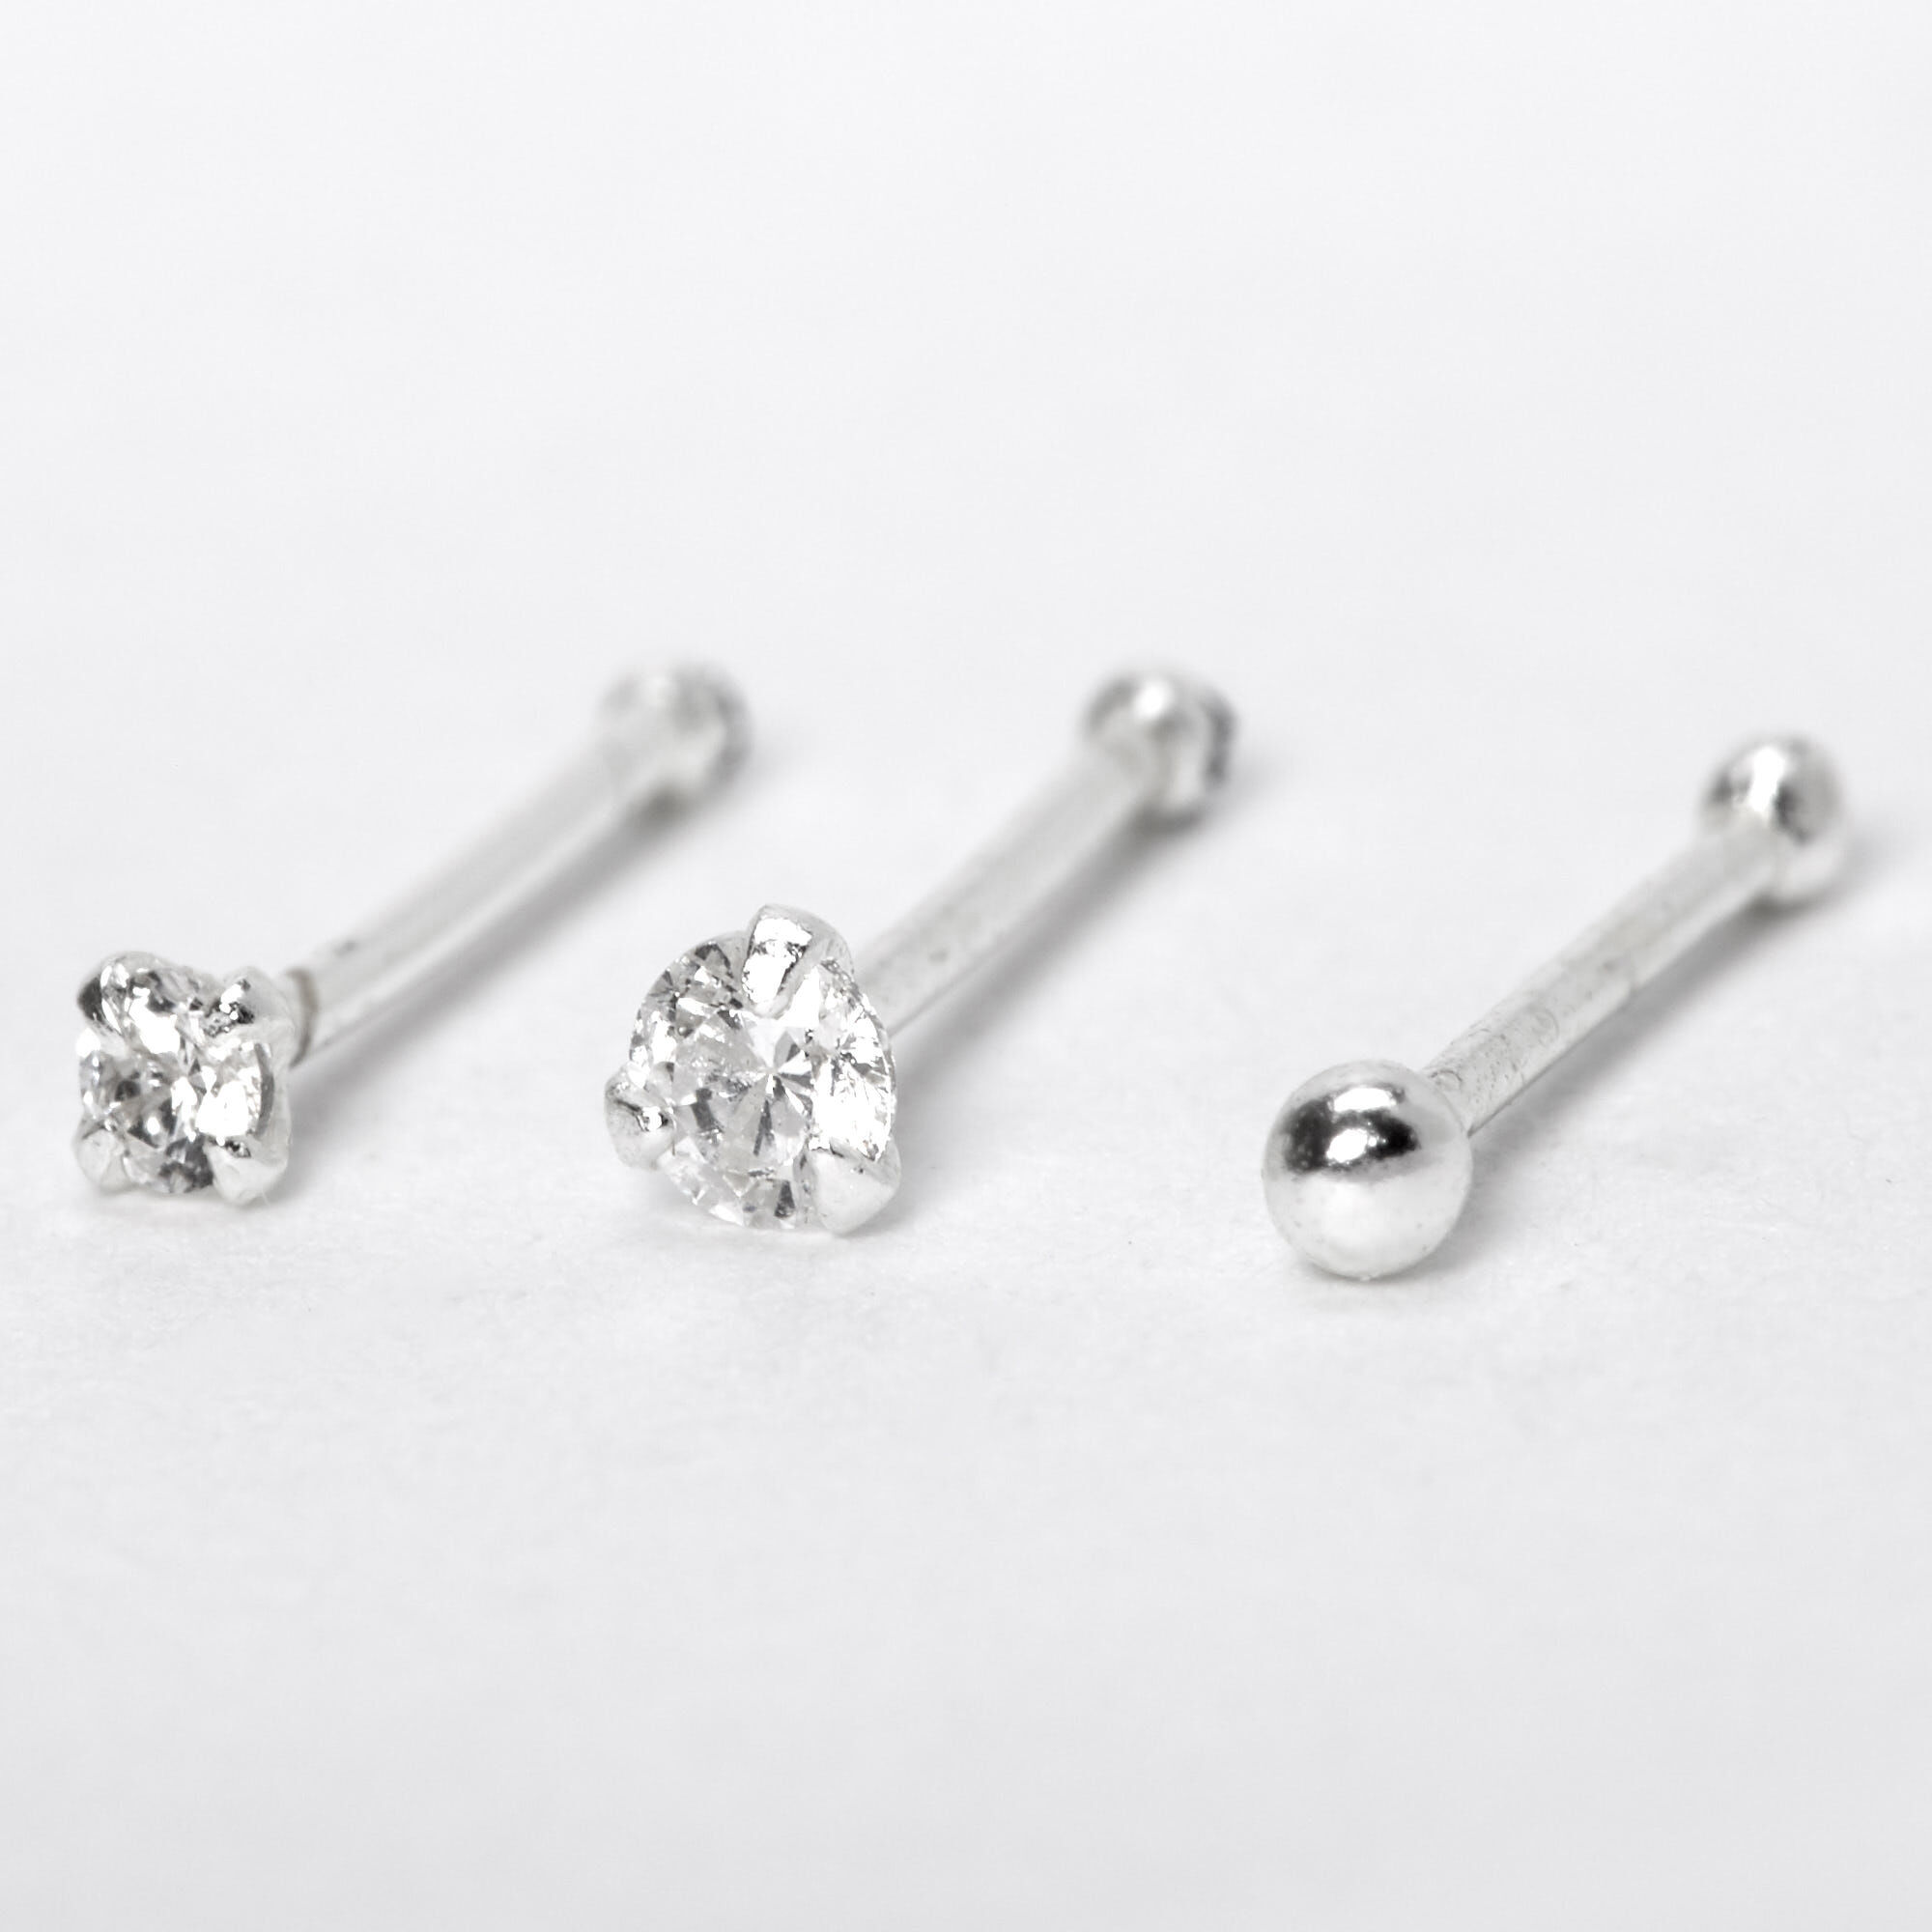 Pack of 20 Pieces Mix Color 22G Sterling Silver Foot Straight End Nose Pin Stud